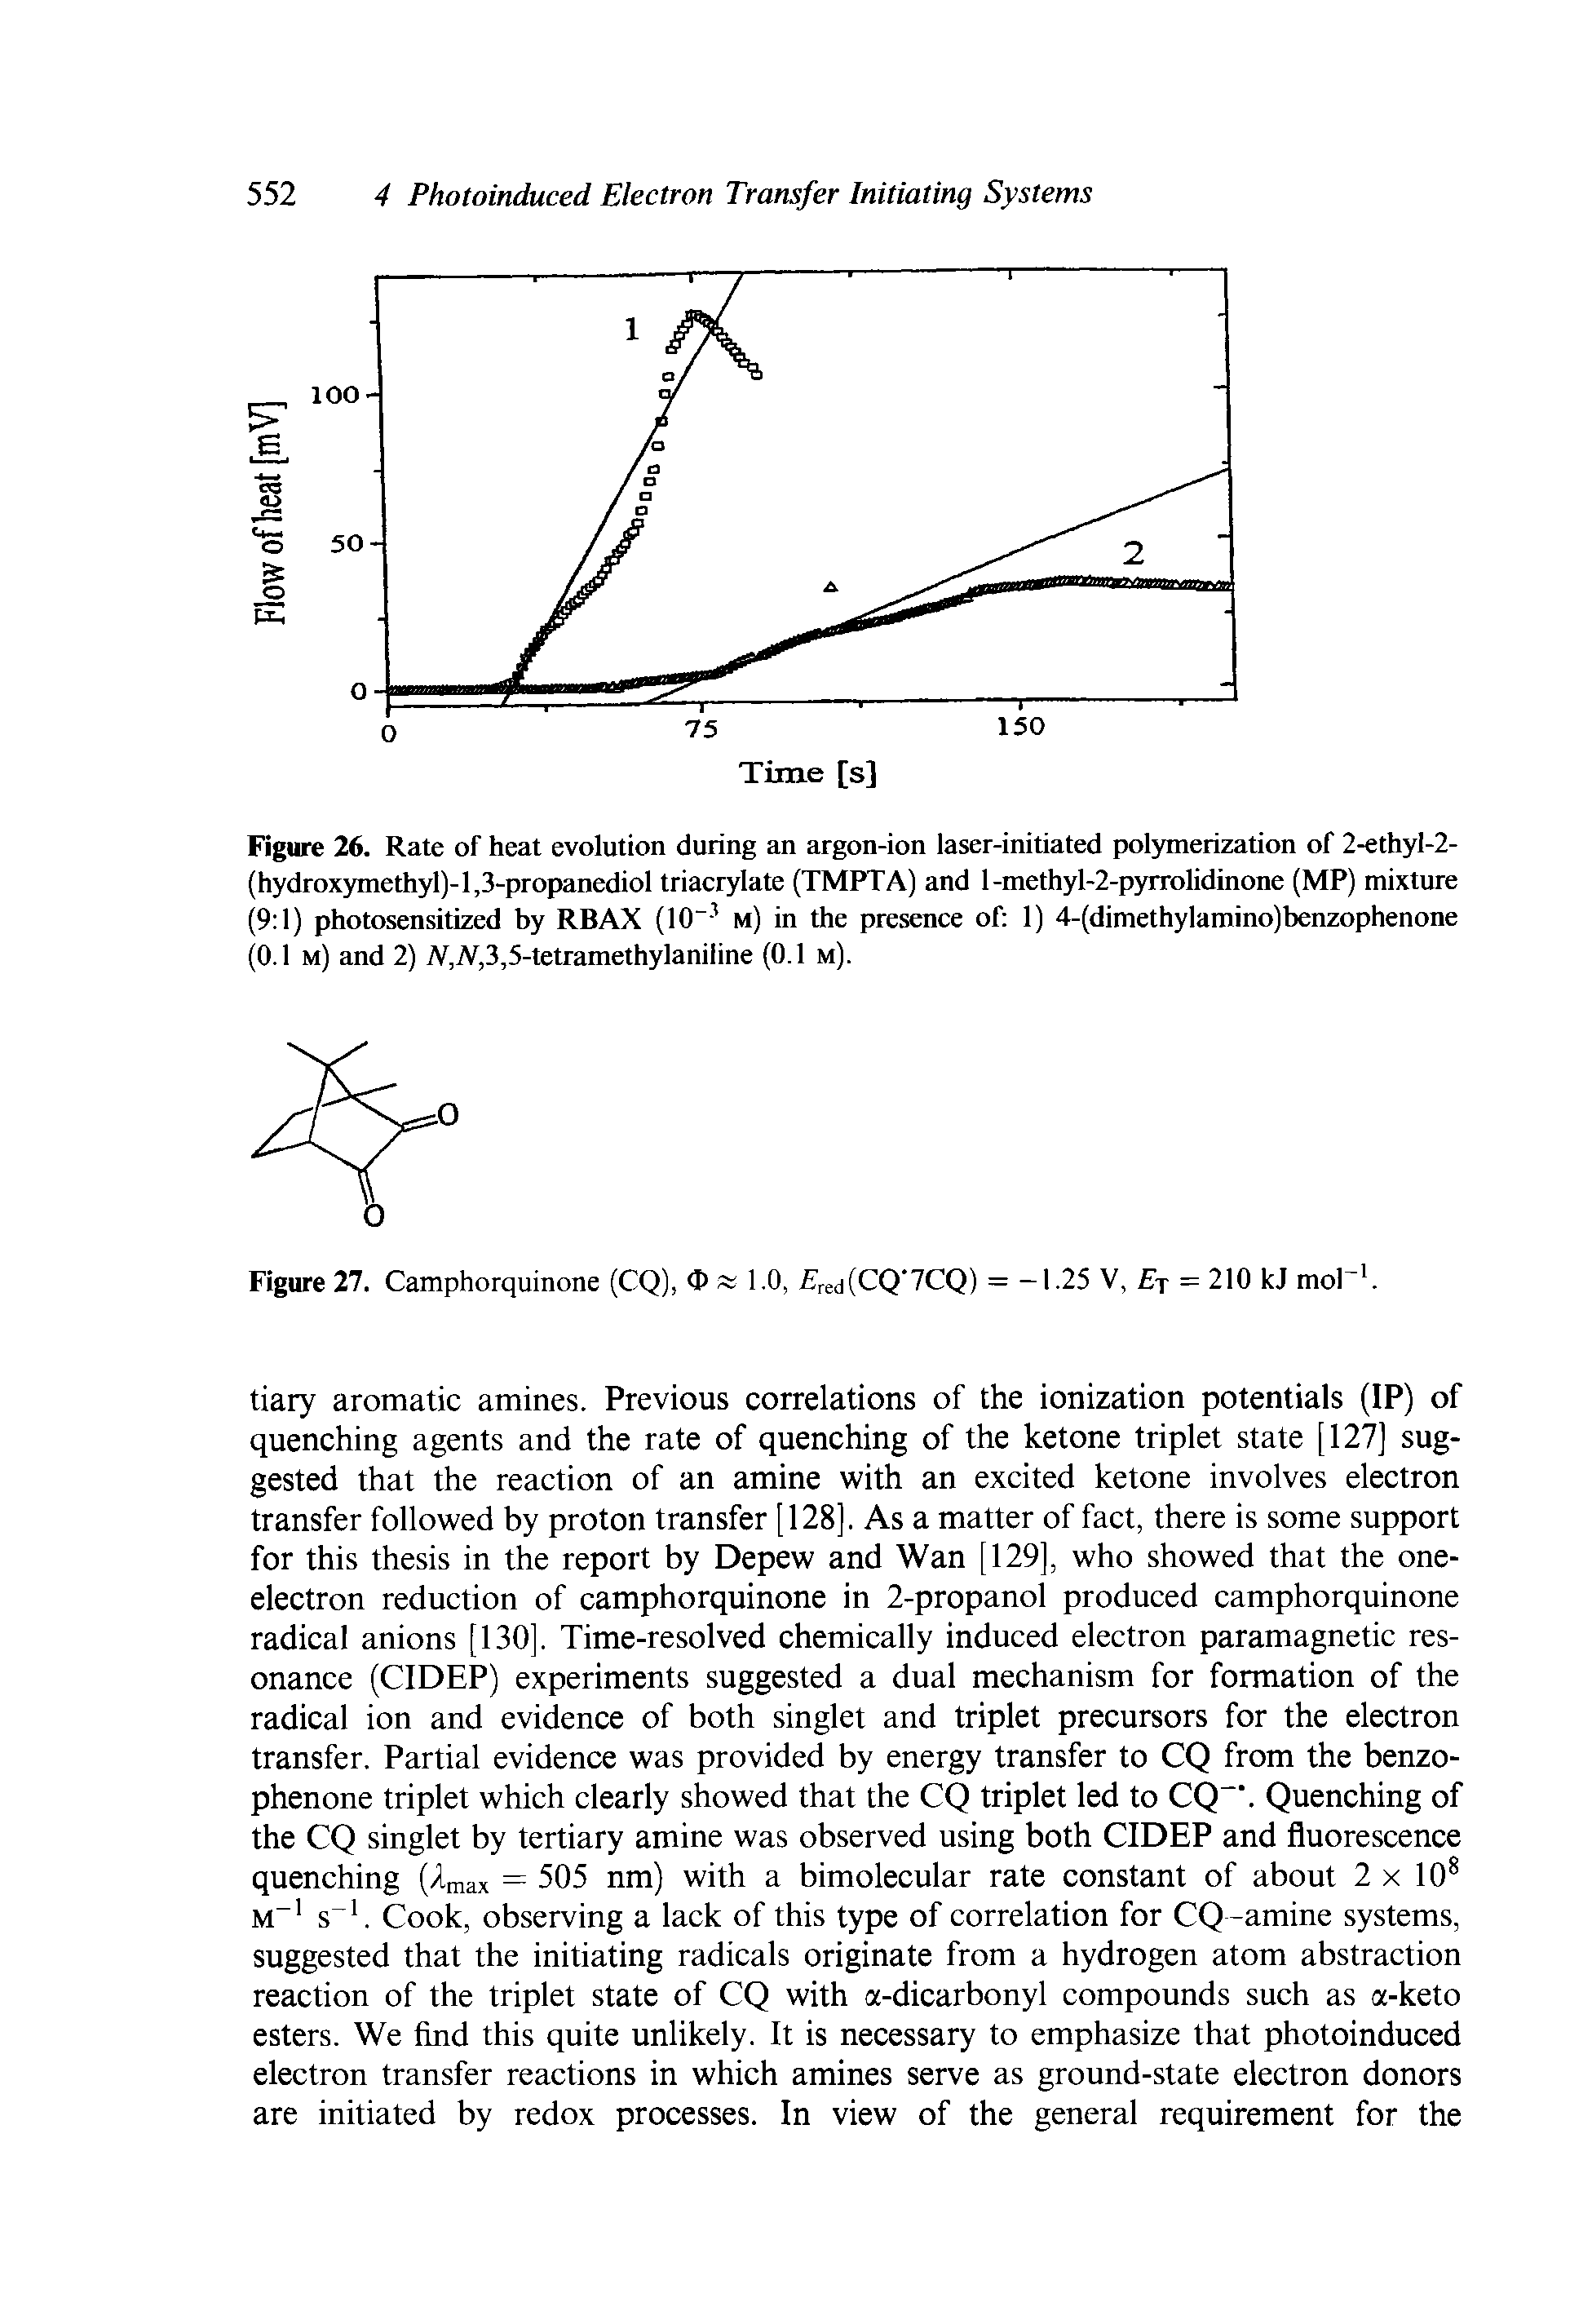 Figure 26. Rate of heat evolution during an argon-ion laser-initiated polymerization of 2-ethyl-2-(hydroxymethyl)-l,3-propanediol triacrylate (TMPTA) and l-methyl-2-pyrrolidinone (MP) mixture (9 1) photosensitized by RBAX (10 - m) in the presence of 1) 4-(dimethylamino)benzophenone (0.1 m) and 2) iV,A,3,5-tetramethylaniline (0.1 m).